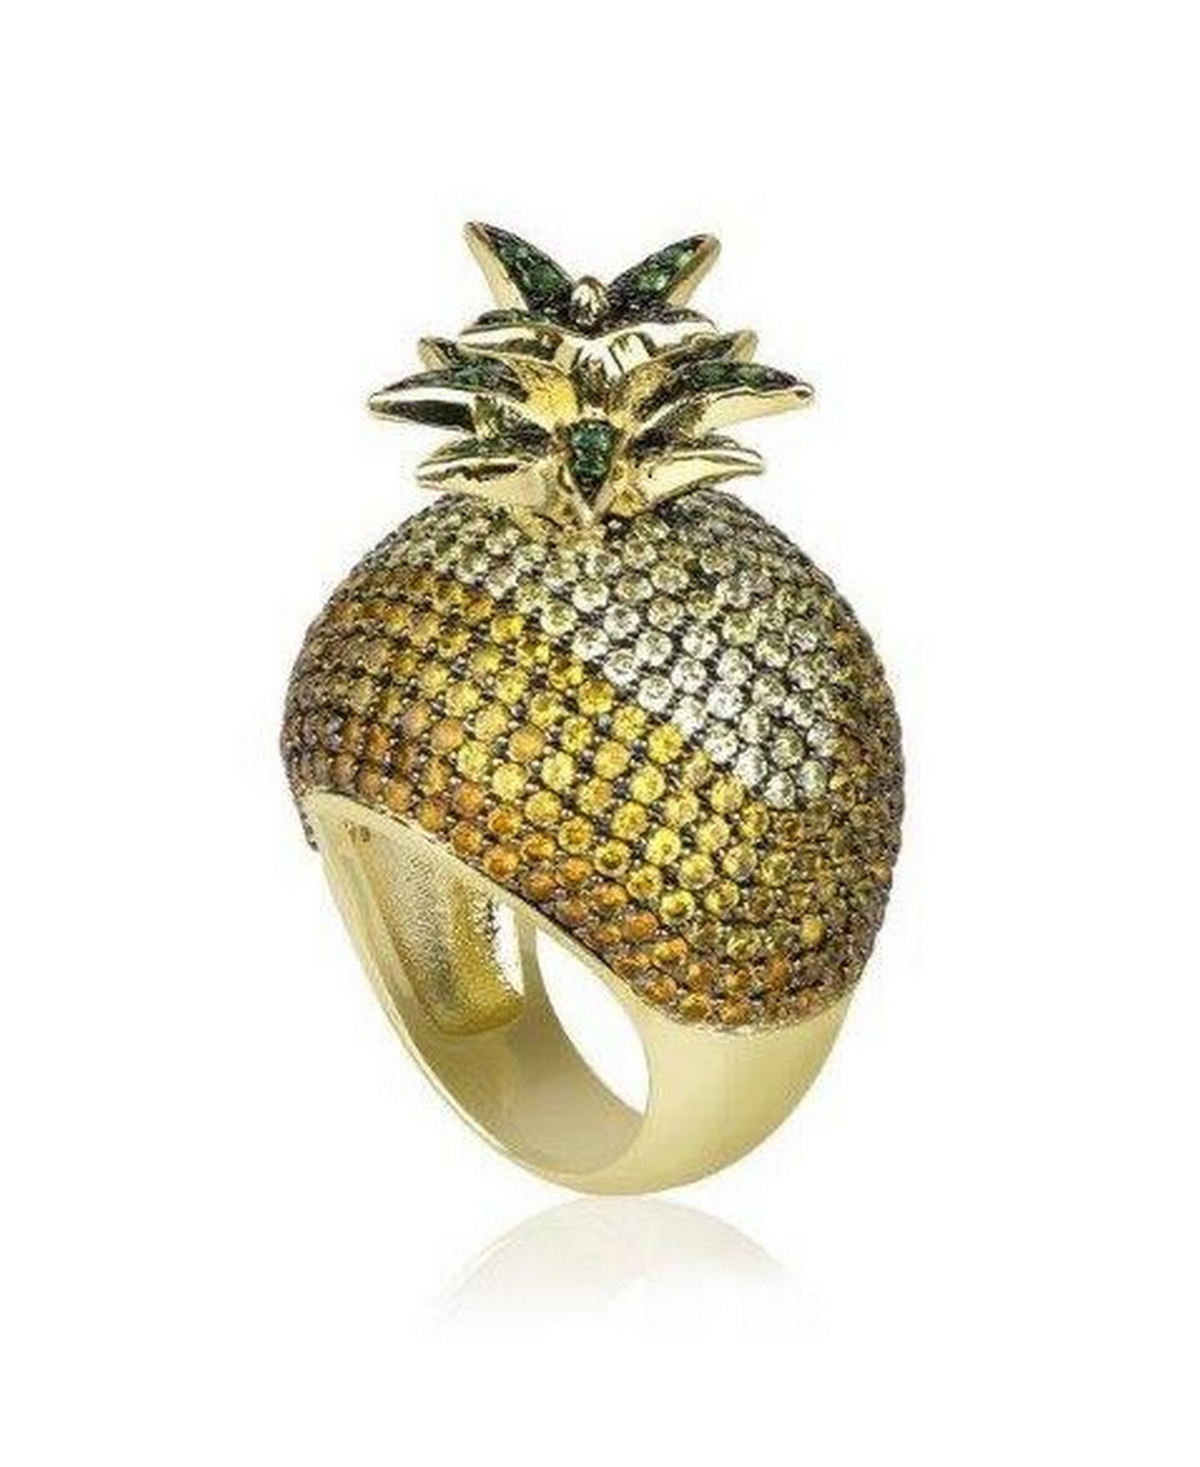 Cubic Zirconia Pineapple Cocktail Ring - Gold